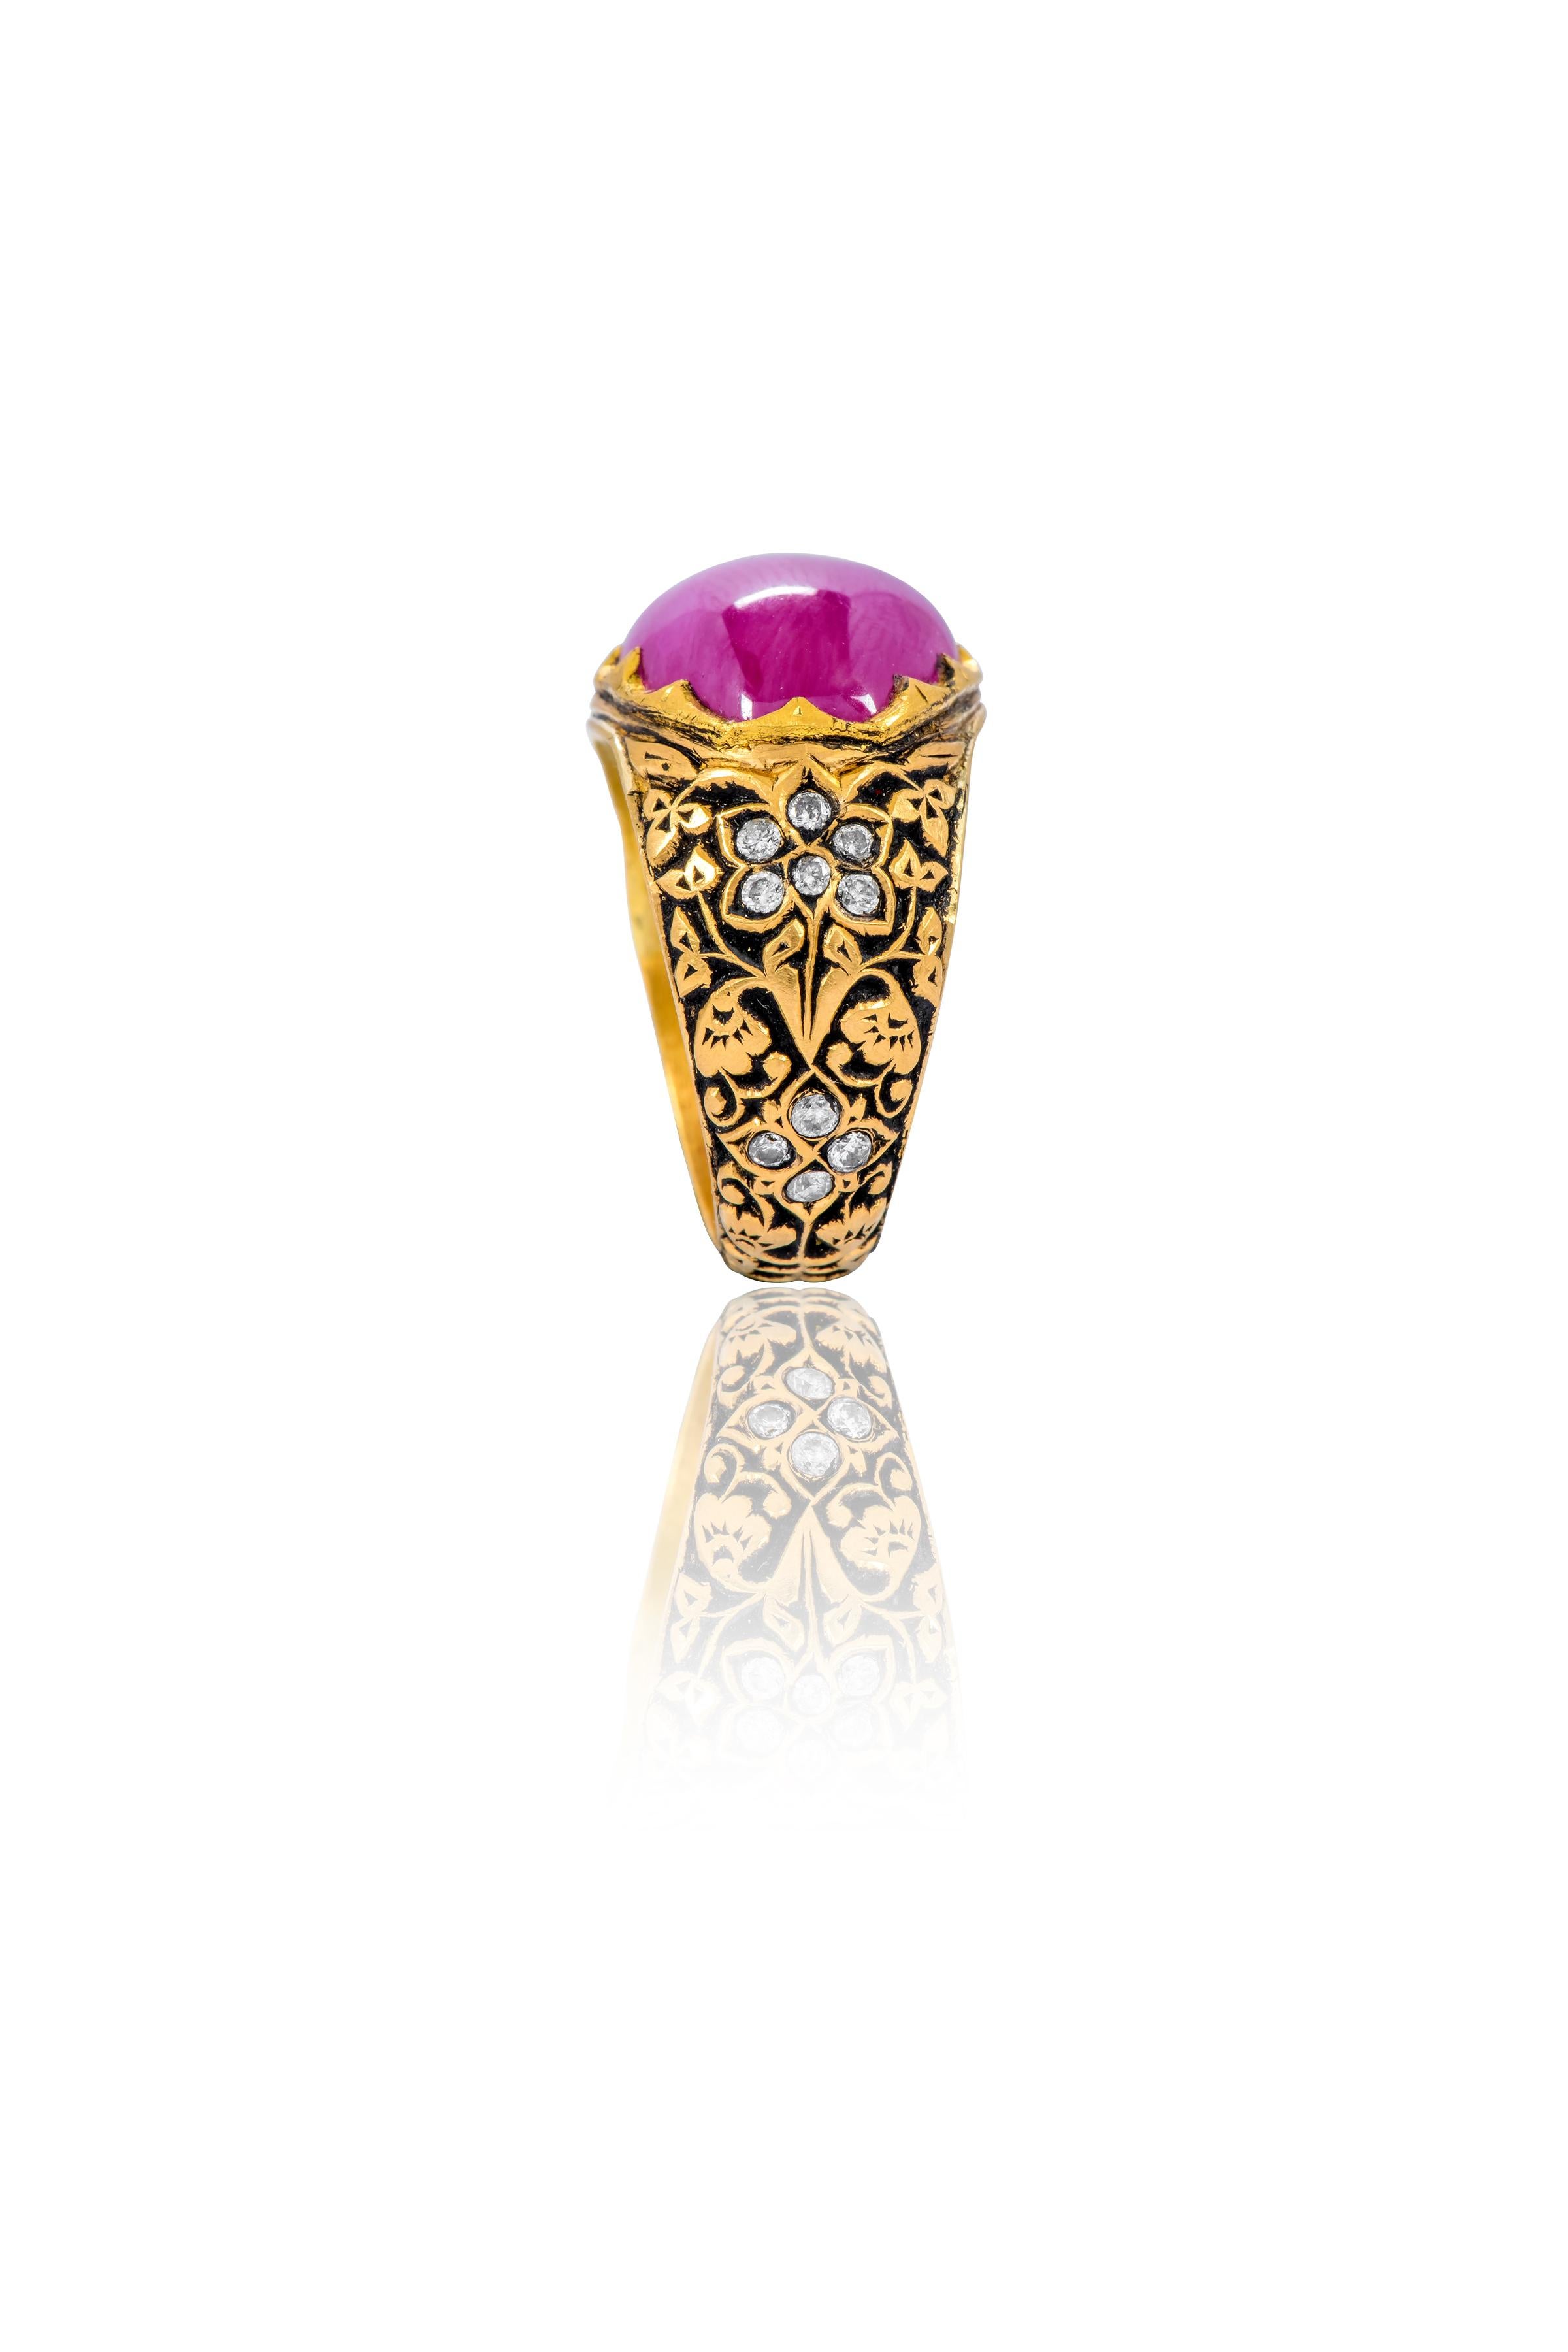 Anglo-Indian 22 Karat Yellow Gold 14.85 Carat Cabochon Ruby and Diamond Ring For Sale